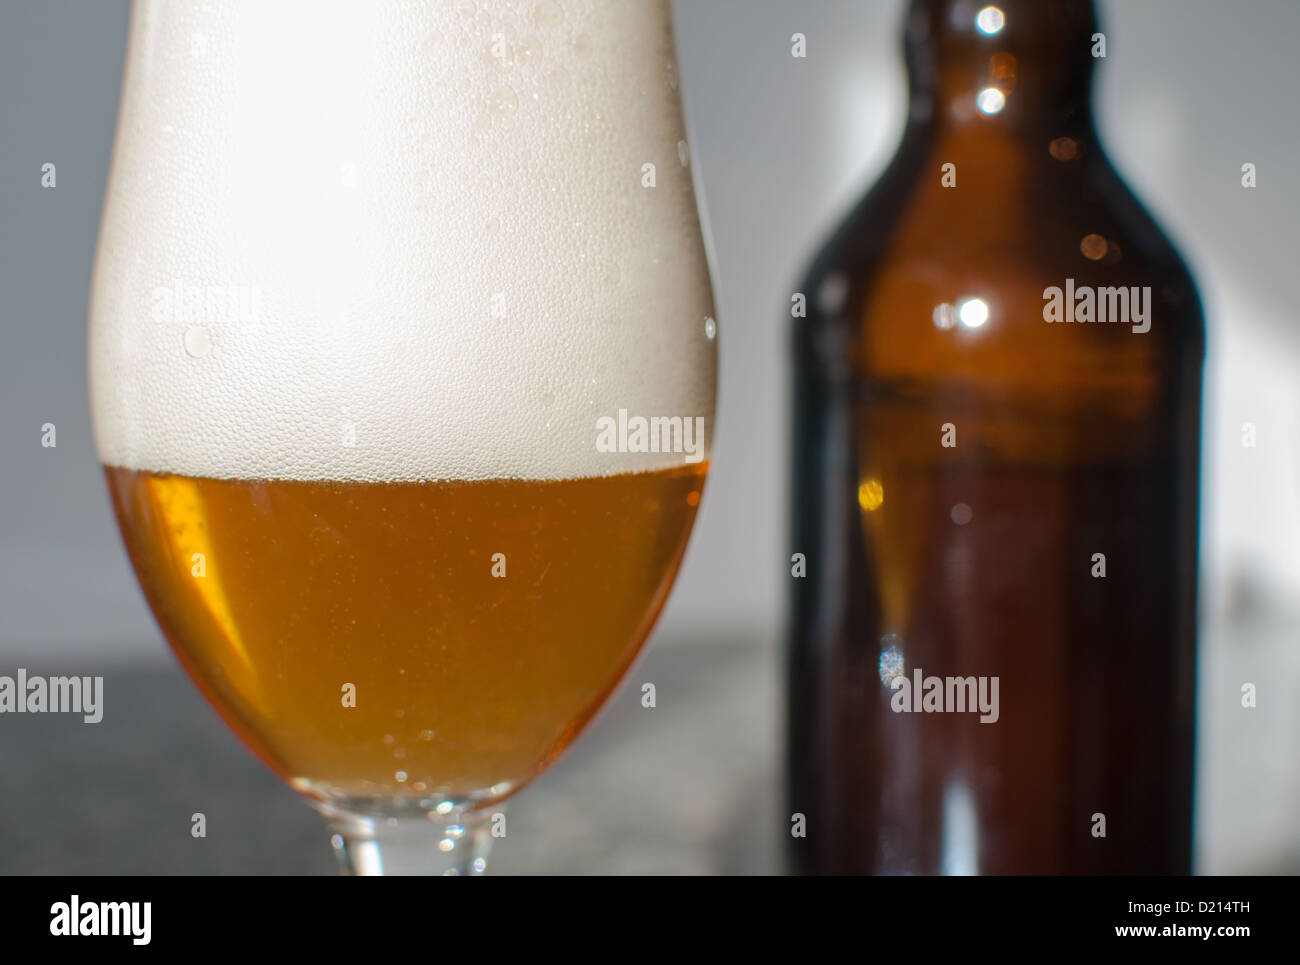 Beer glass close-up with bottle Stock Photo